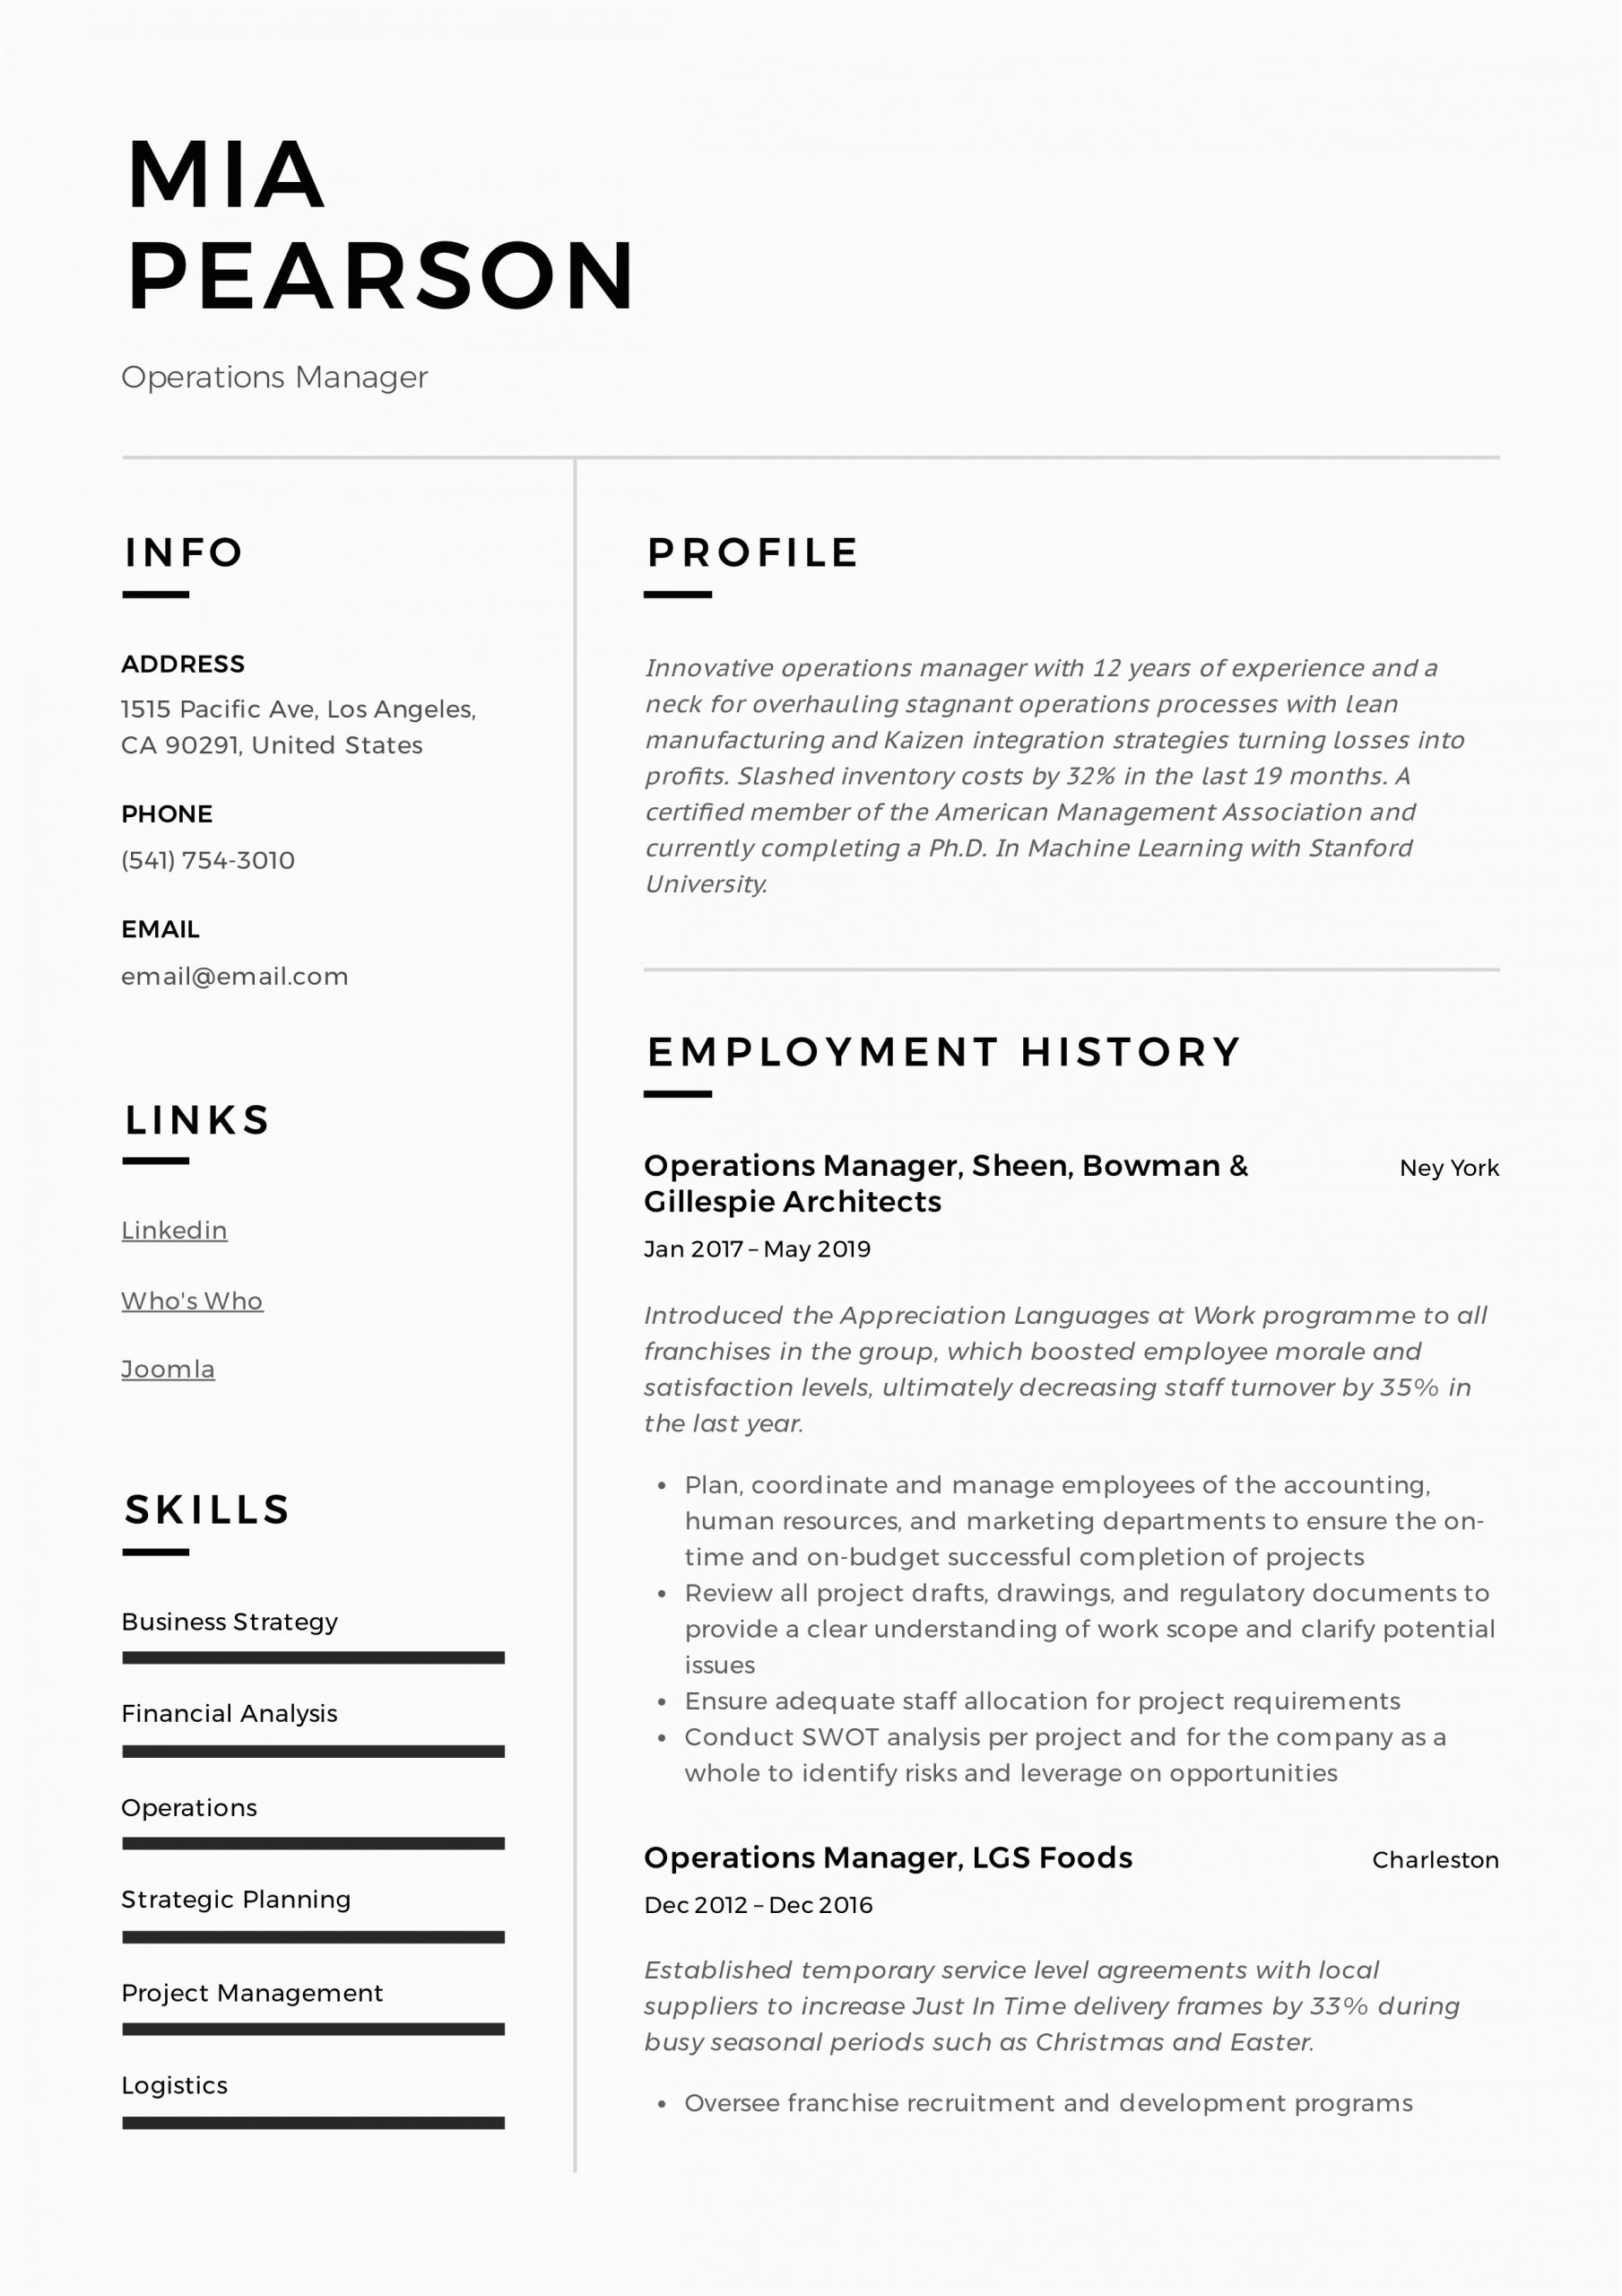 Resume Summary Sample for Operations Manager Operations Manager Resume & Writing Guide